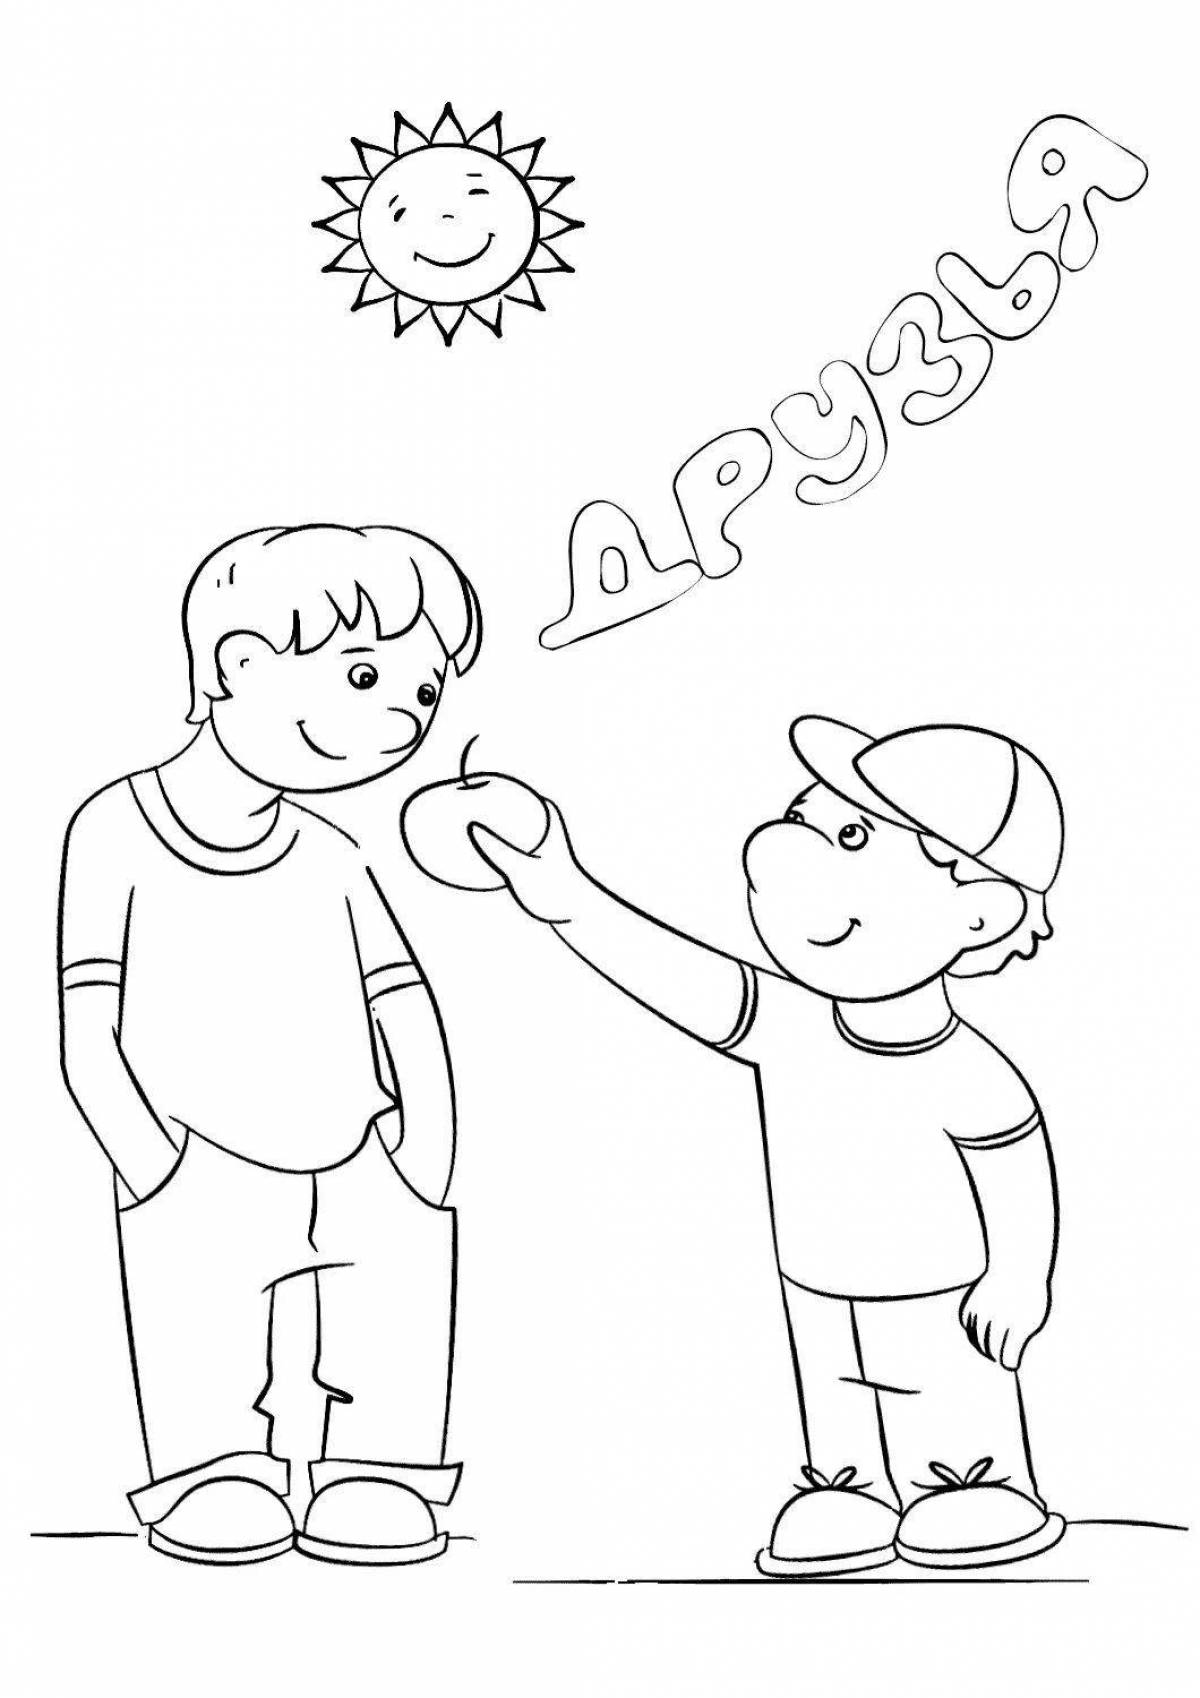 Playful friendship coloring page